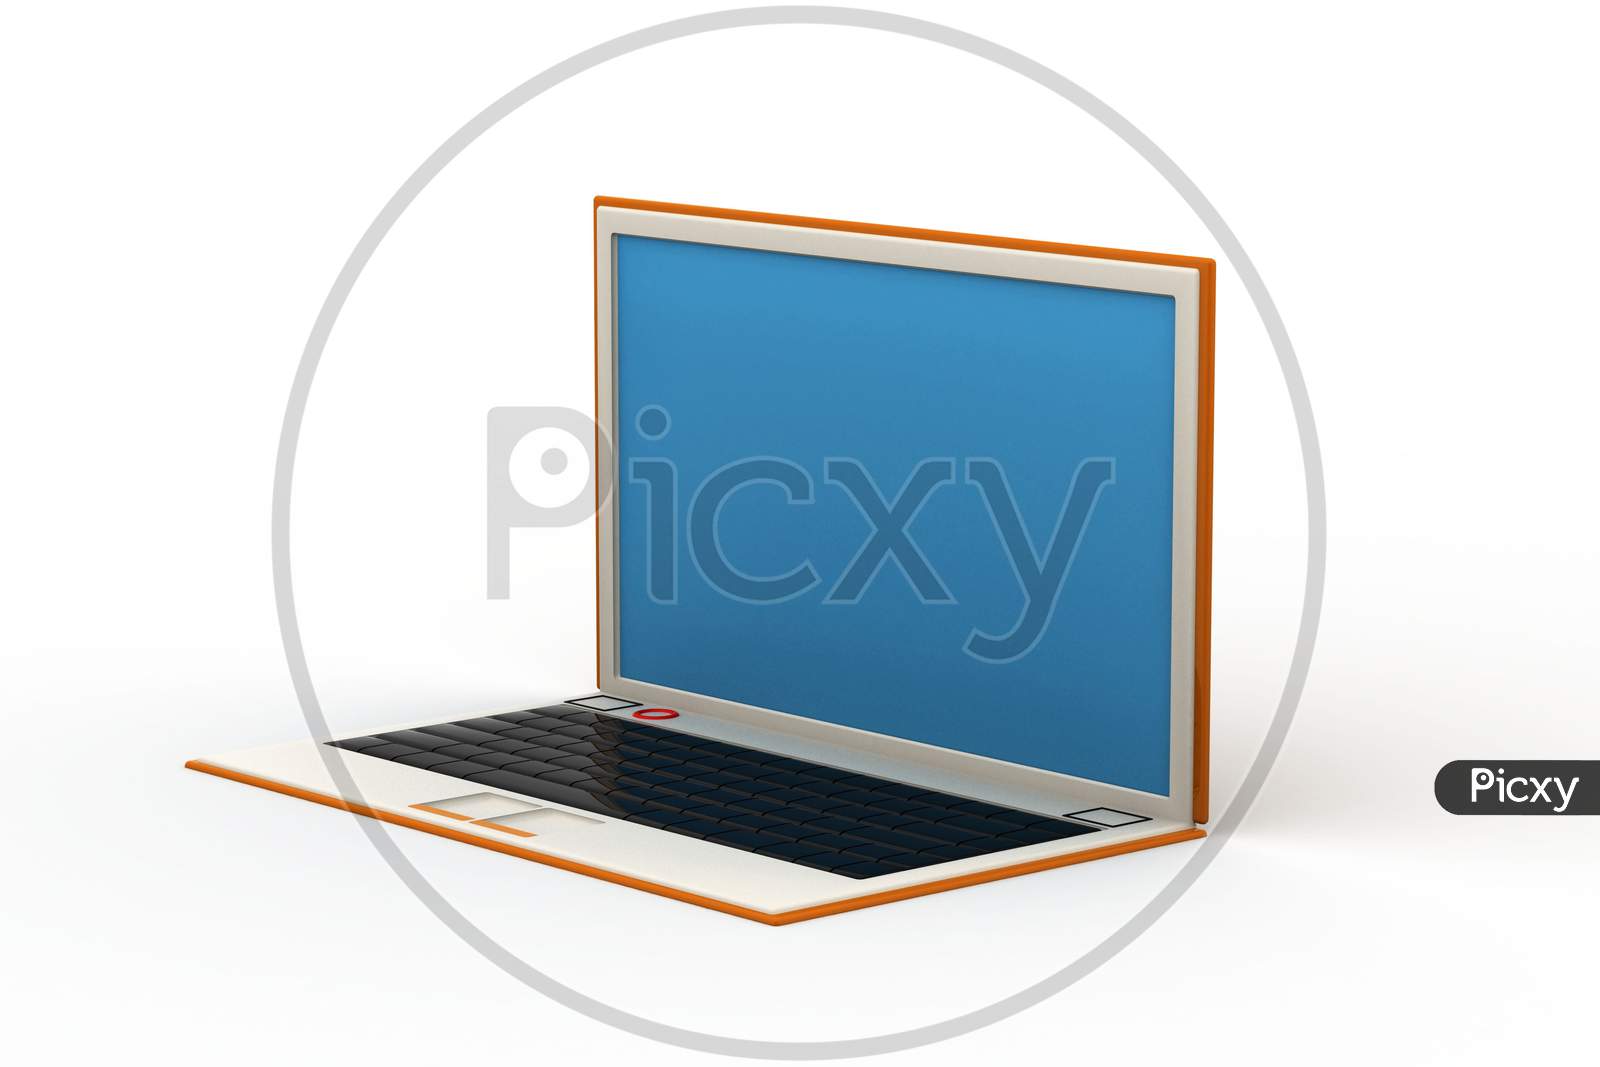 3D Rendering Of Laptop In White Background